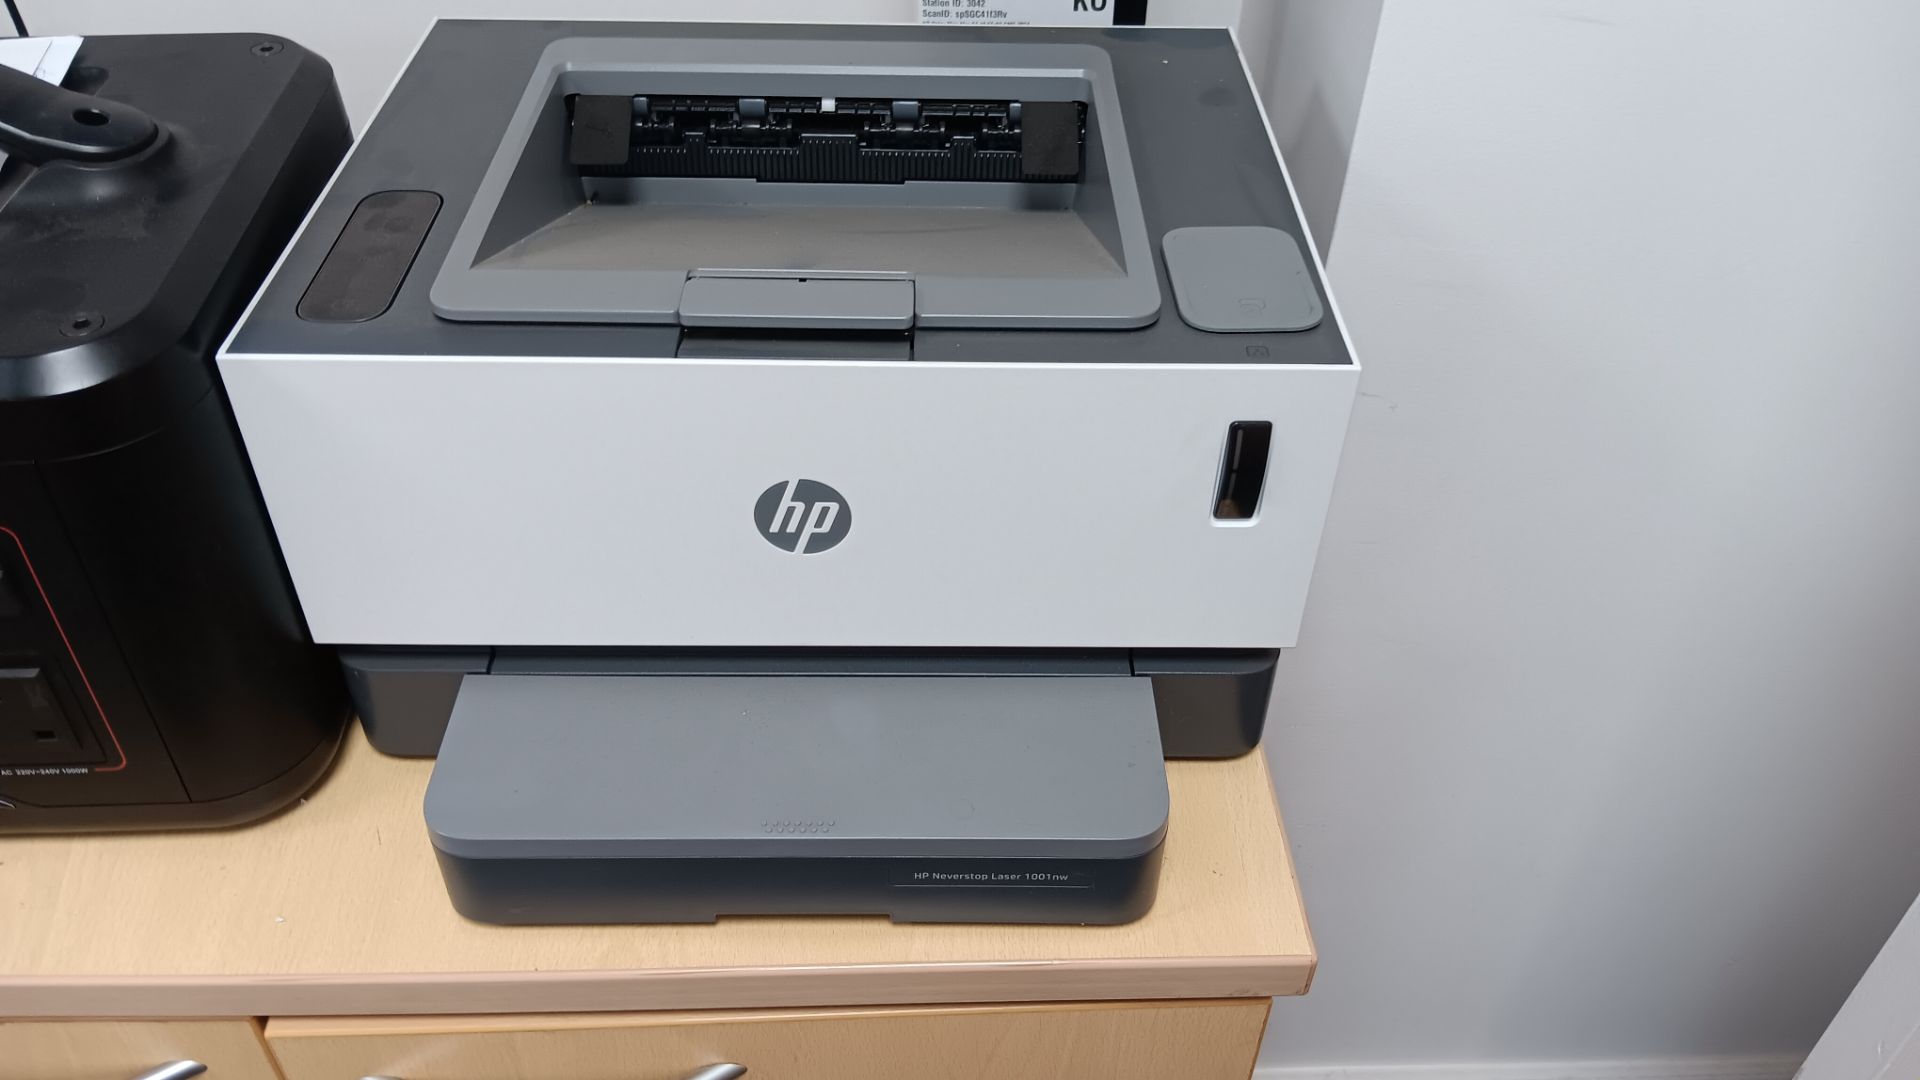 HP Neverstop Laser 1001nw mono wireless laser printer, serial number CNBRP2V1SN (Feb 2021) (Location